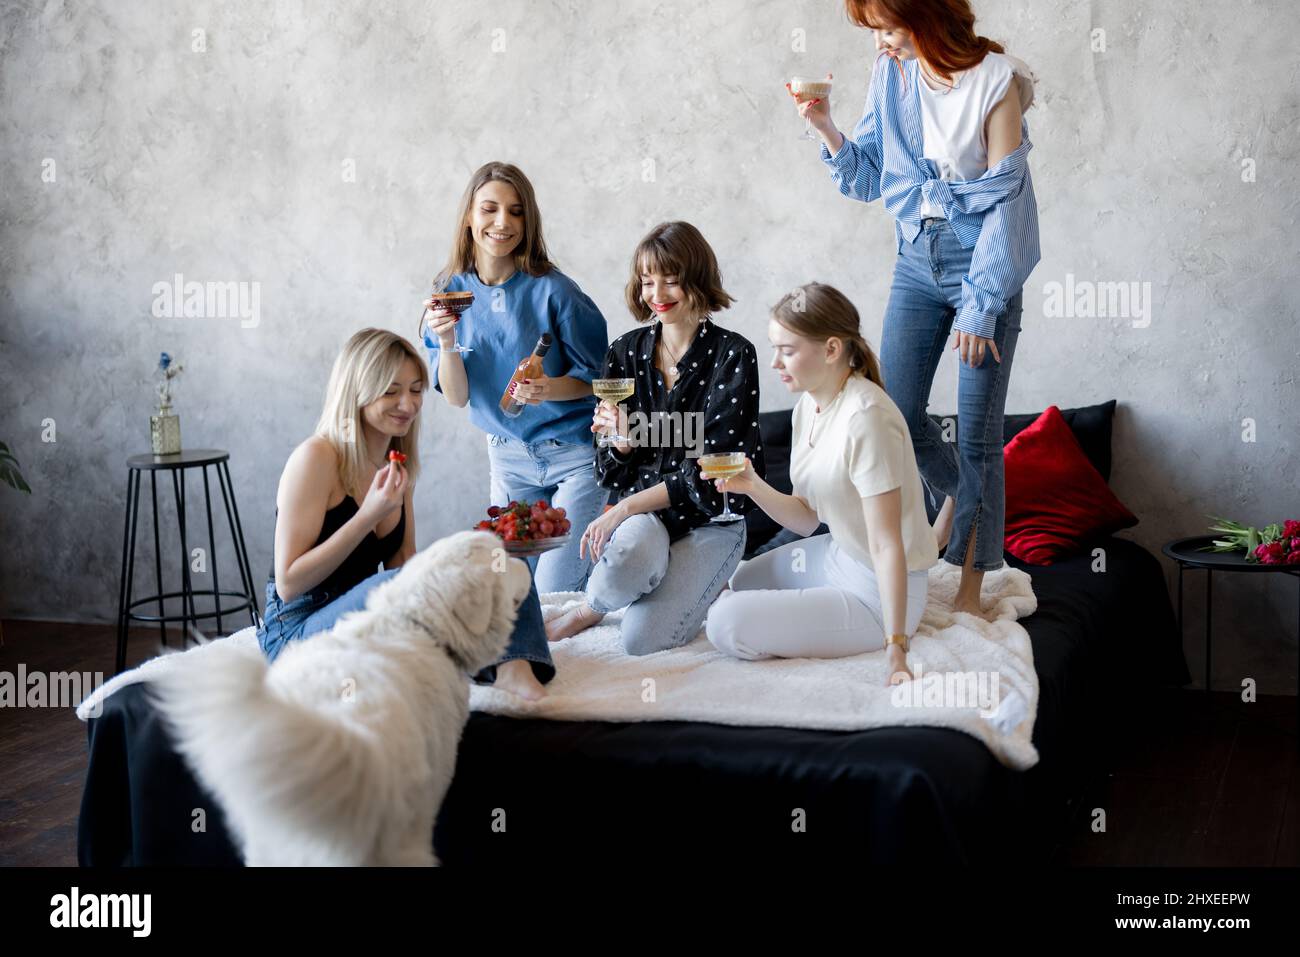 Four young adult girlfriends dressed casual having fun, sitting with drinks and playing with dog on bed. Caucasian women celebrating and having party at home. Concept of female friendship, beauty and happiness Stock Photo